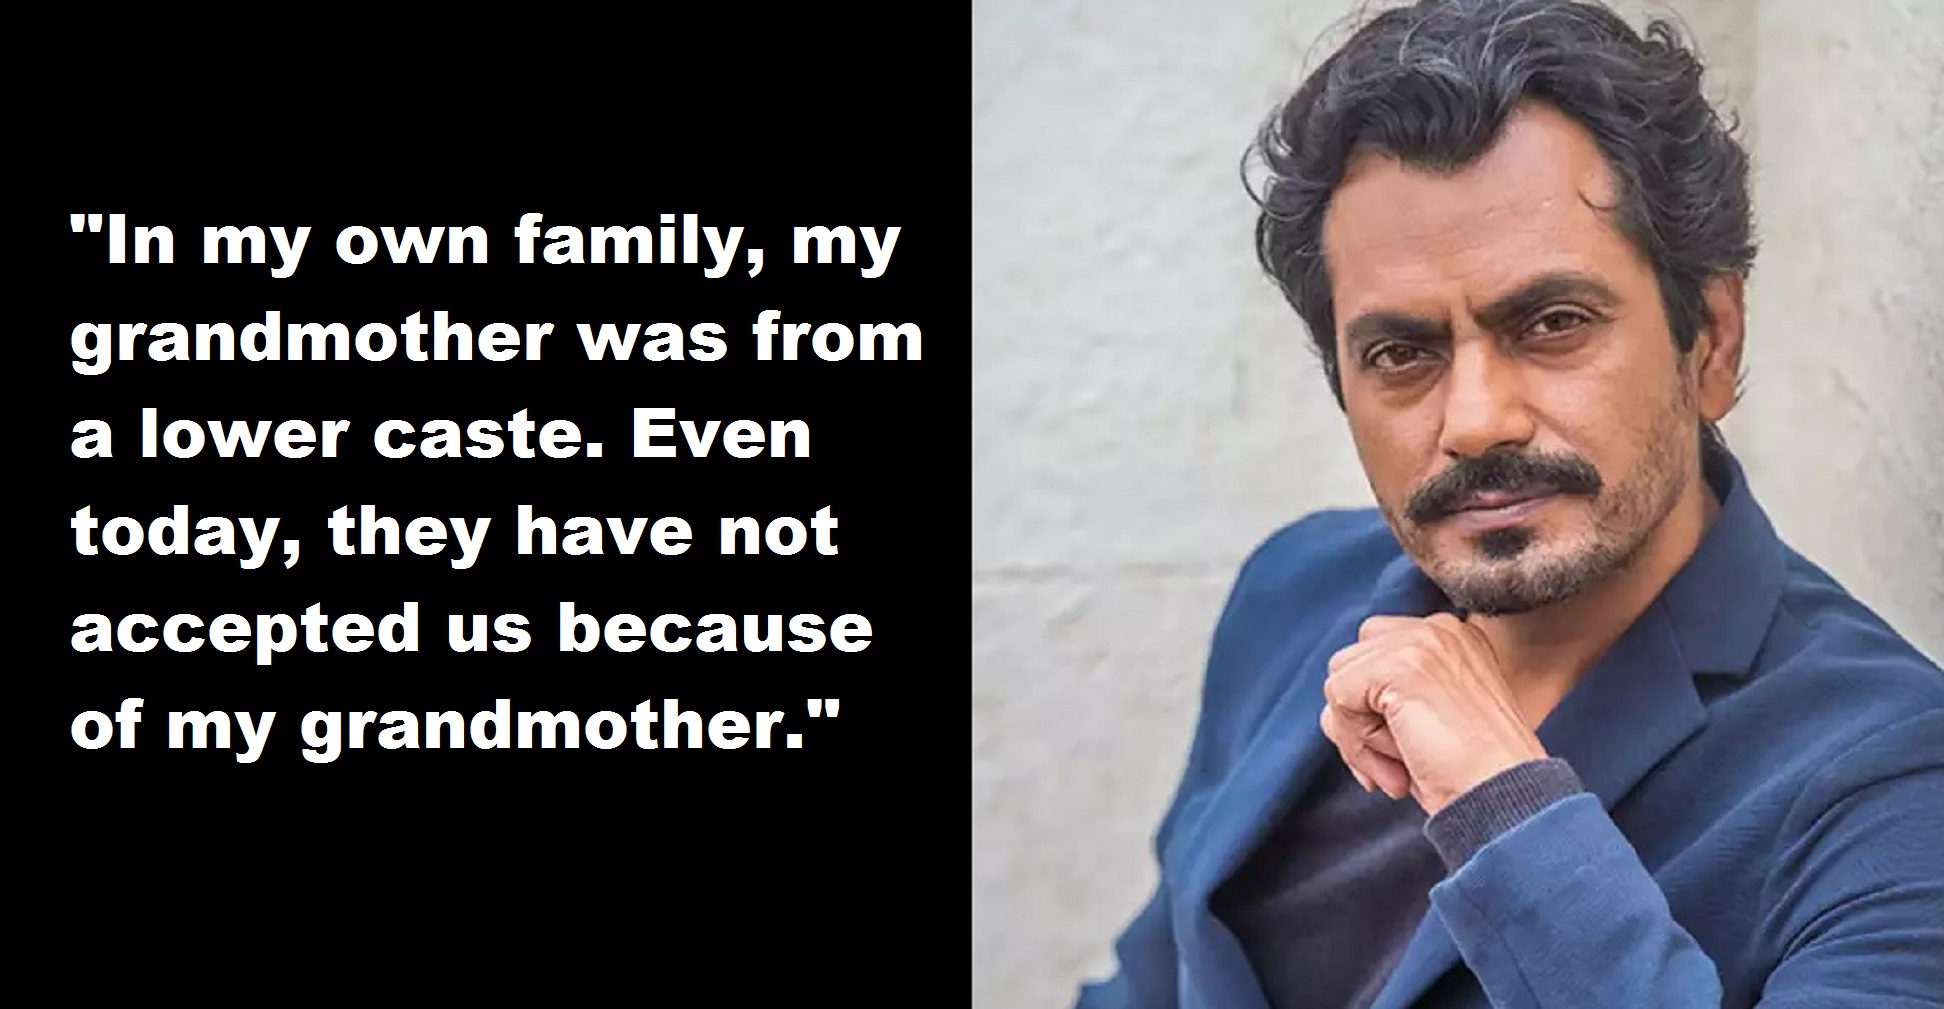 Nawazuddin Siddiqui Says He Still Faces Discrimination In His Village Because Of His Caste